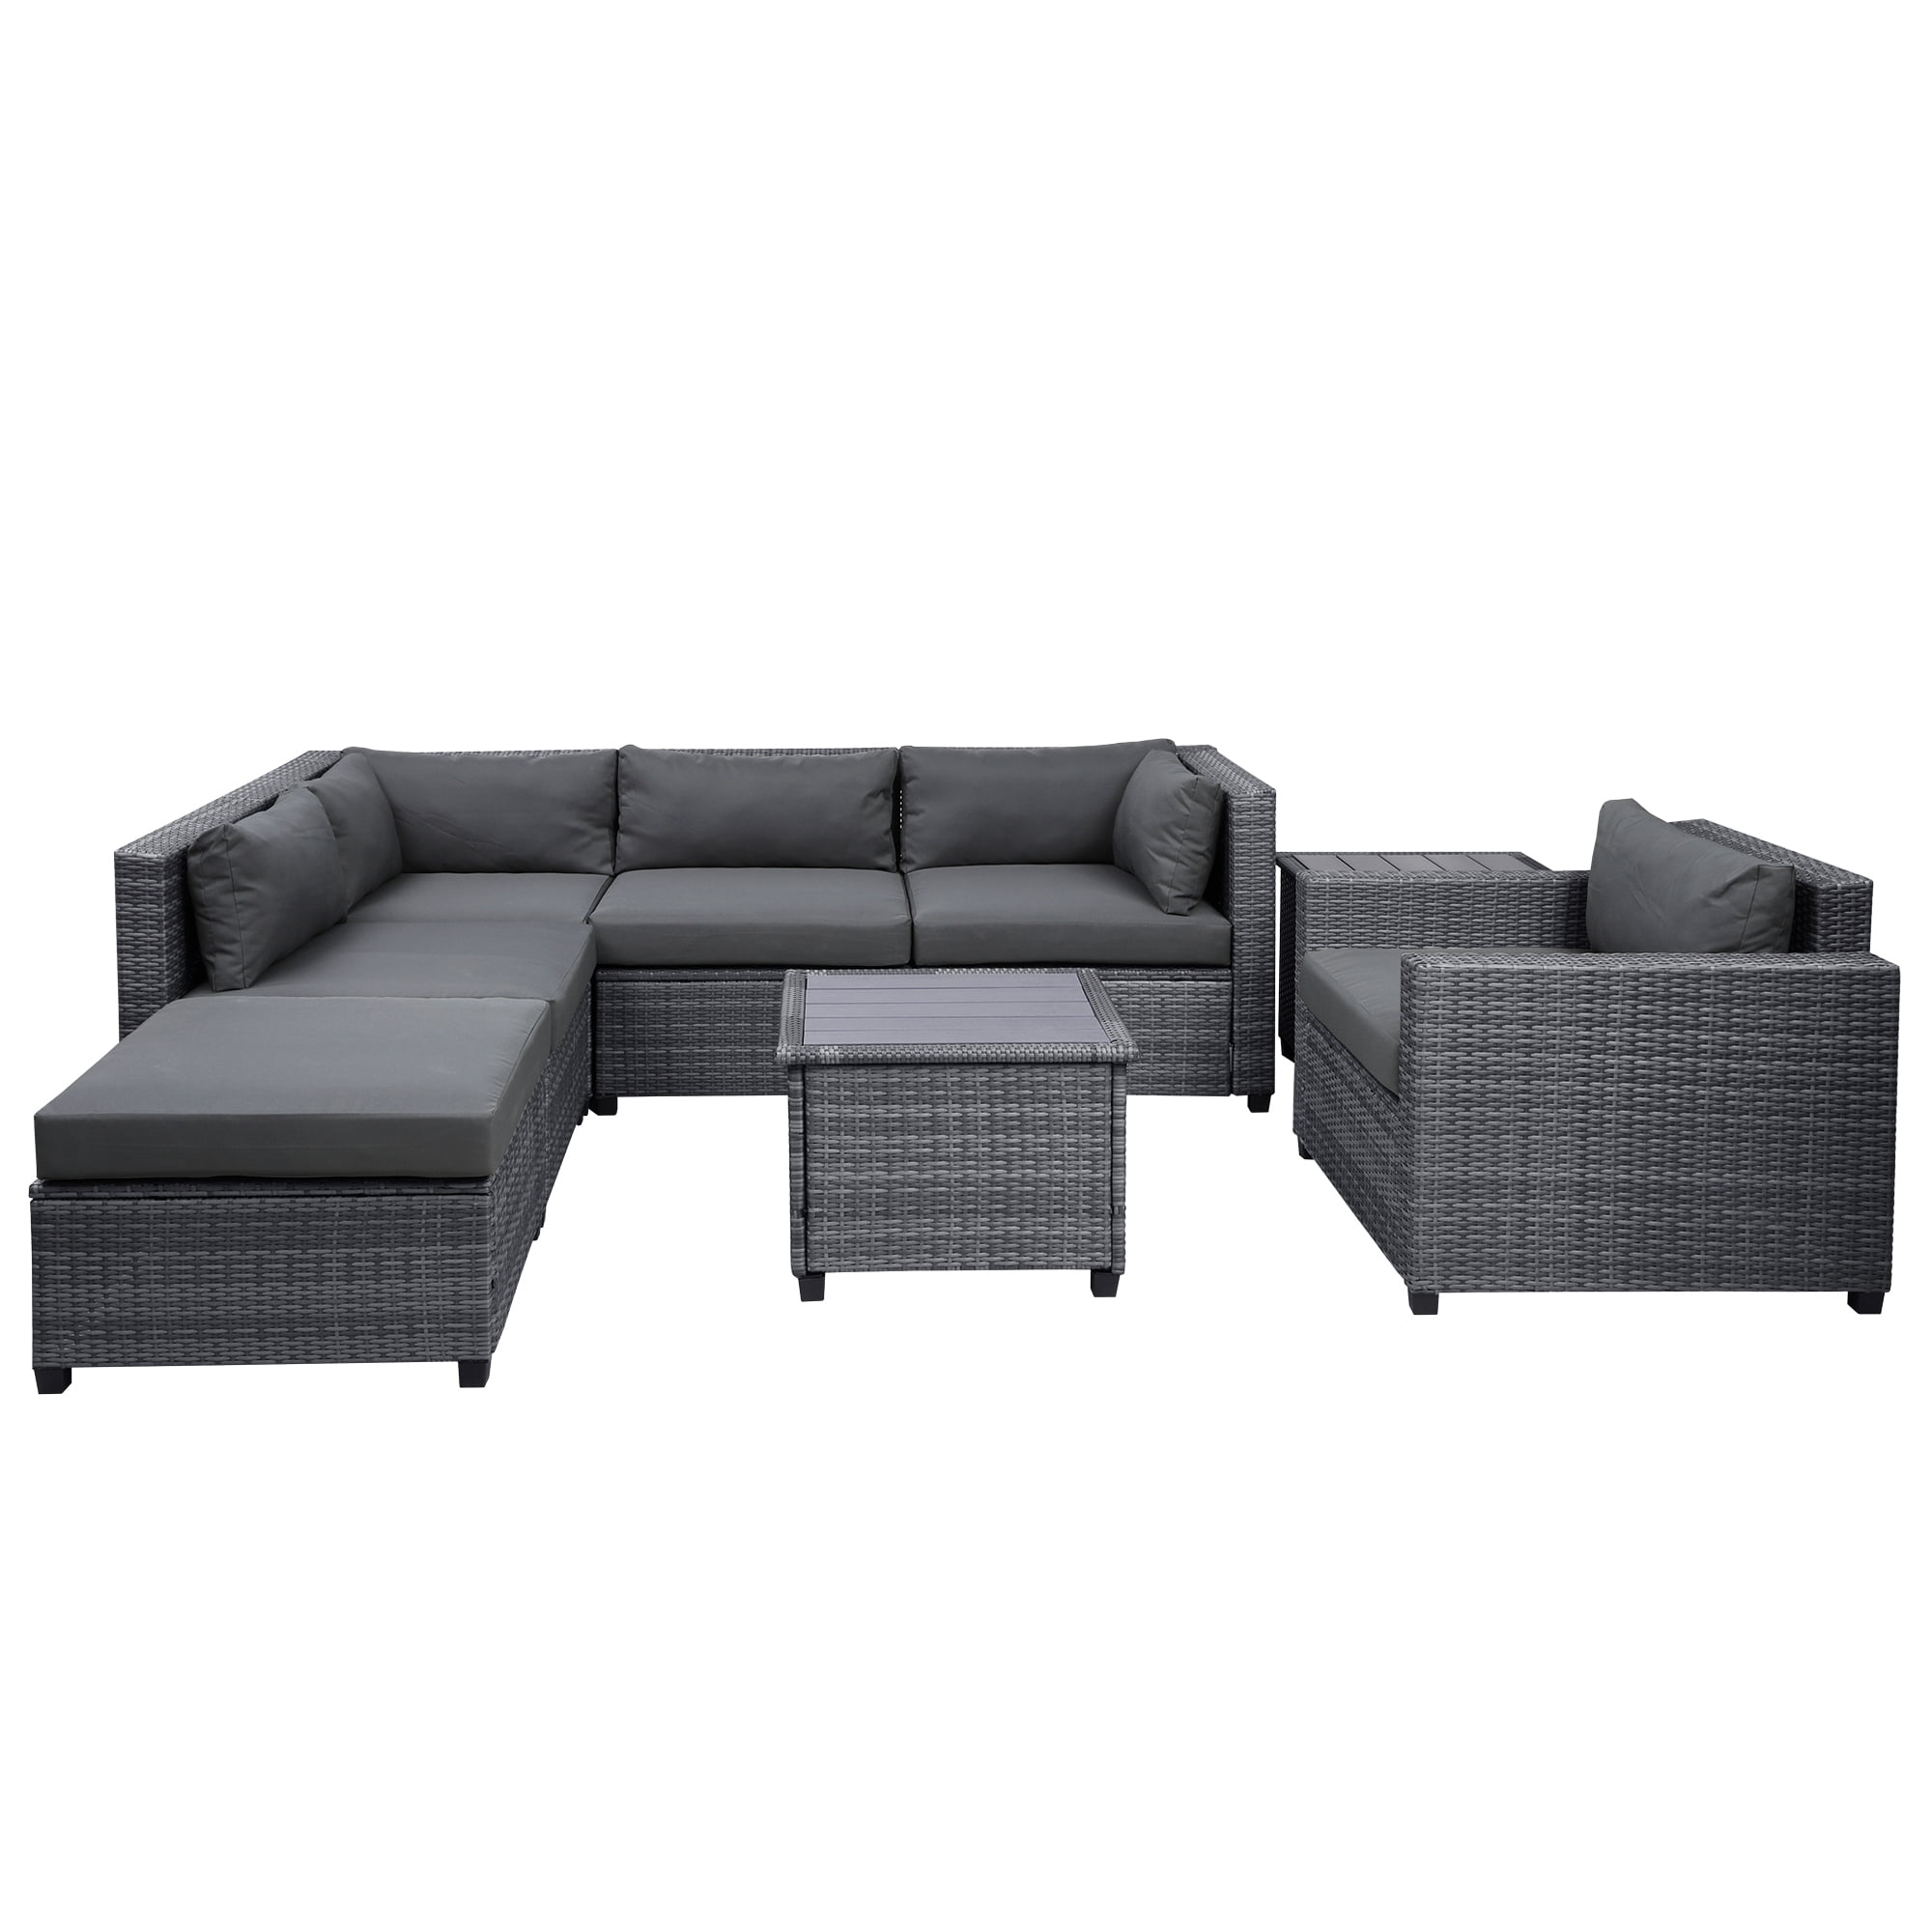 8 Sectional Seating Set Wicker Set, Garden Piece Conversation Morden 2 & Rattan All-Weather Pool with Coffee Patio Sofa Tables, Sectional for Cushions Set, Deck Furniture Couch Outdoor Group